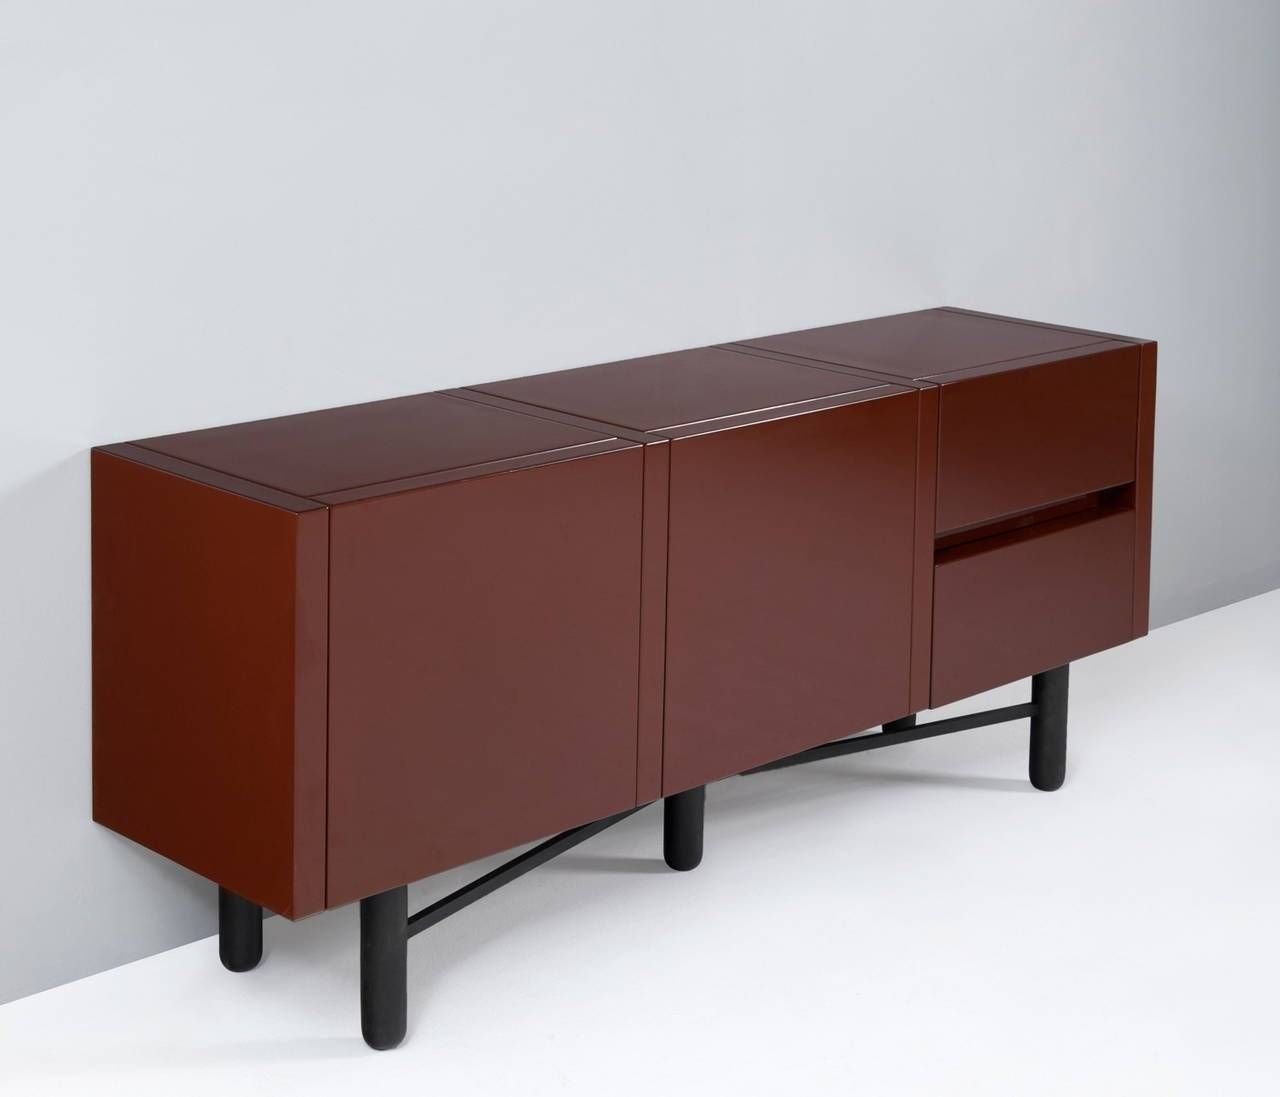 Roche Bobois Red Lacquered High Gloss Sideboard For Sale At 1stdibs With Roche Bobois Sideboards (View 6 of 15)